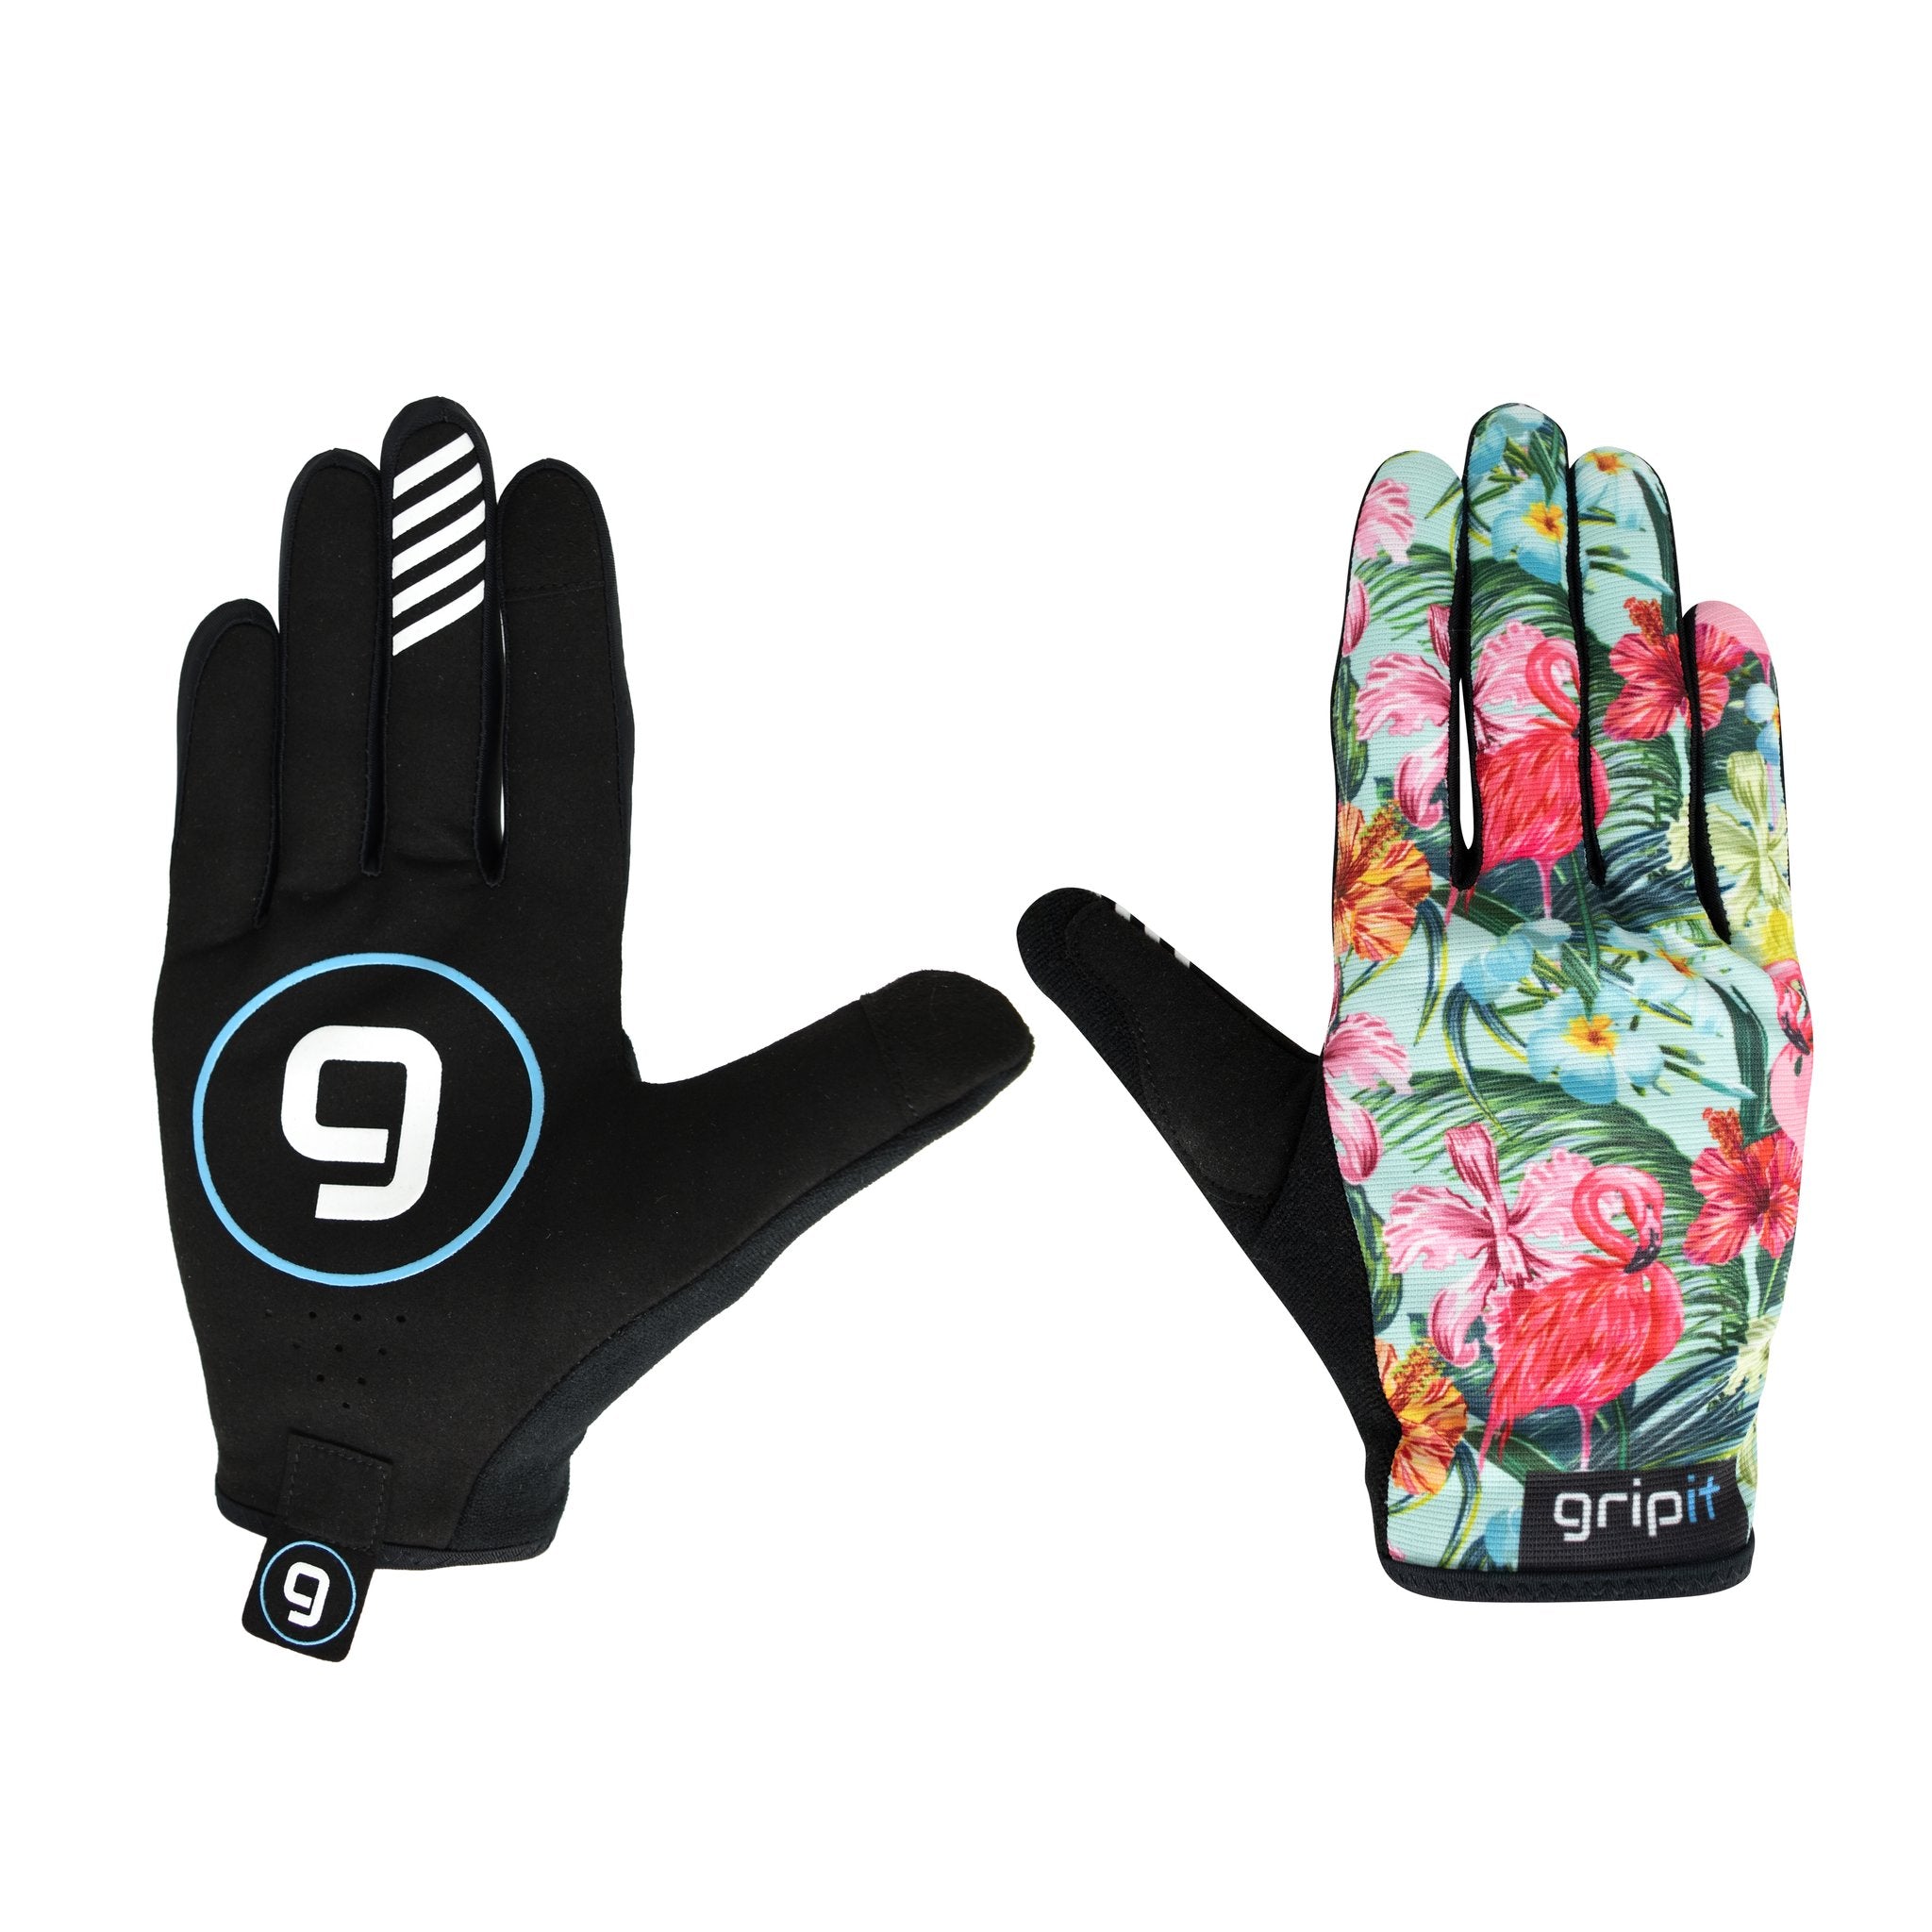 GRIPIT Gloves Tech Collection